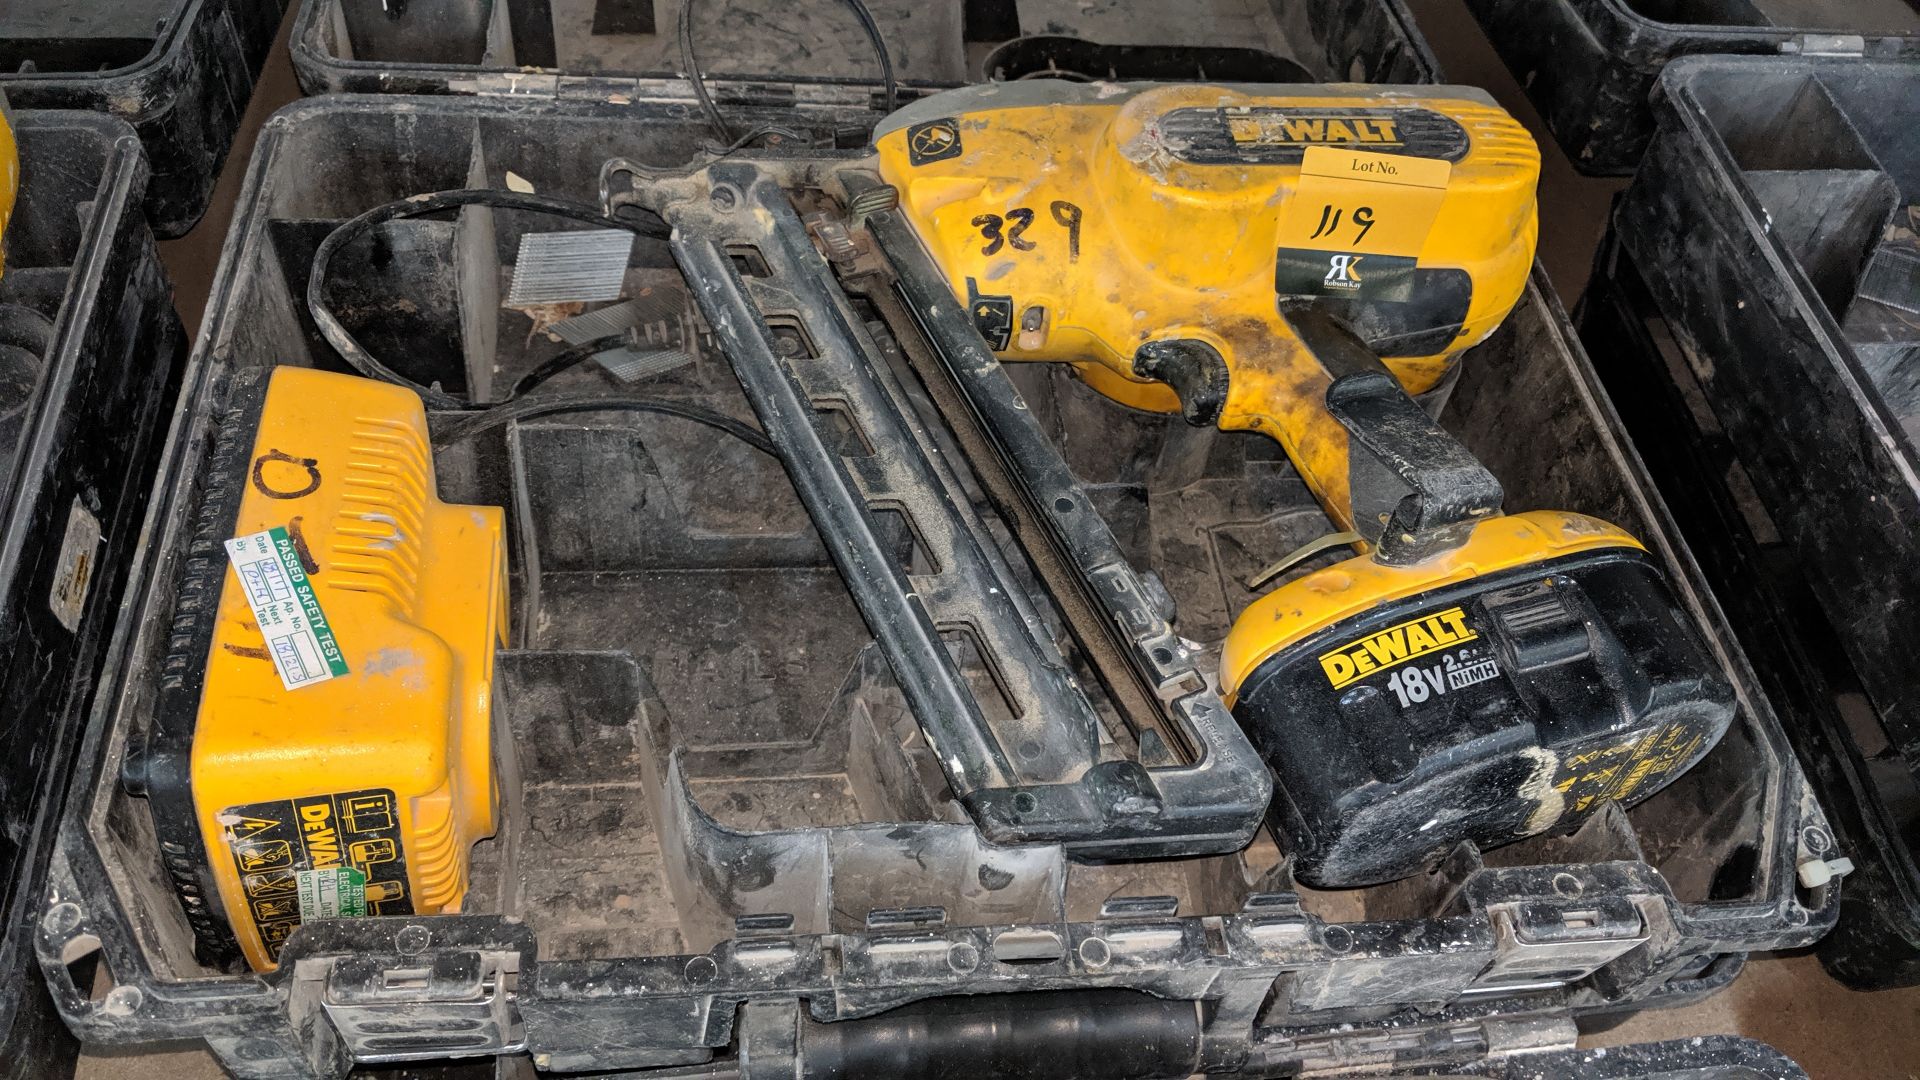 DeWalt cordless nail gun model DC618, including 1 off battery, 1 off charger & 1 off carry case - Image 2 of 3